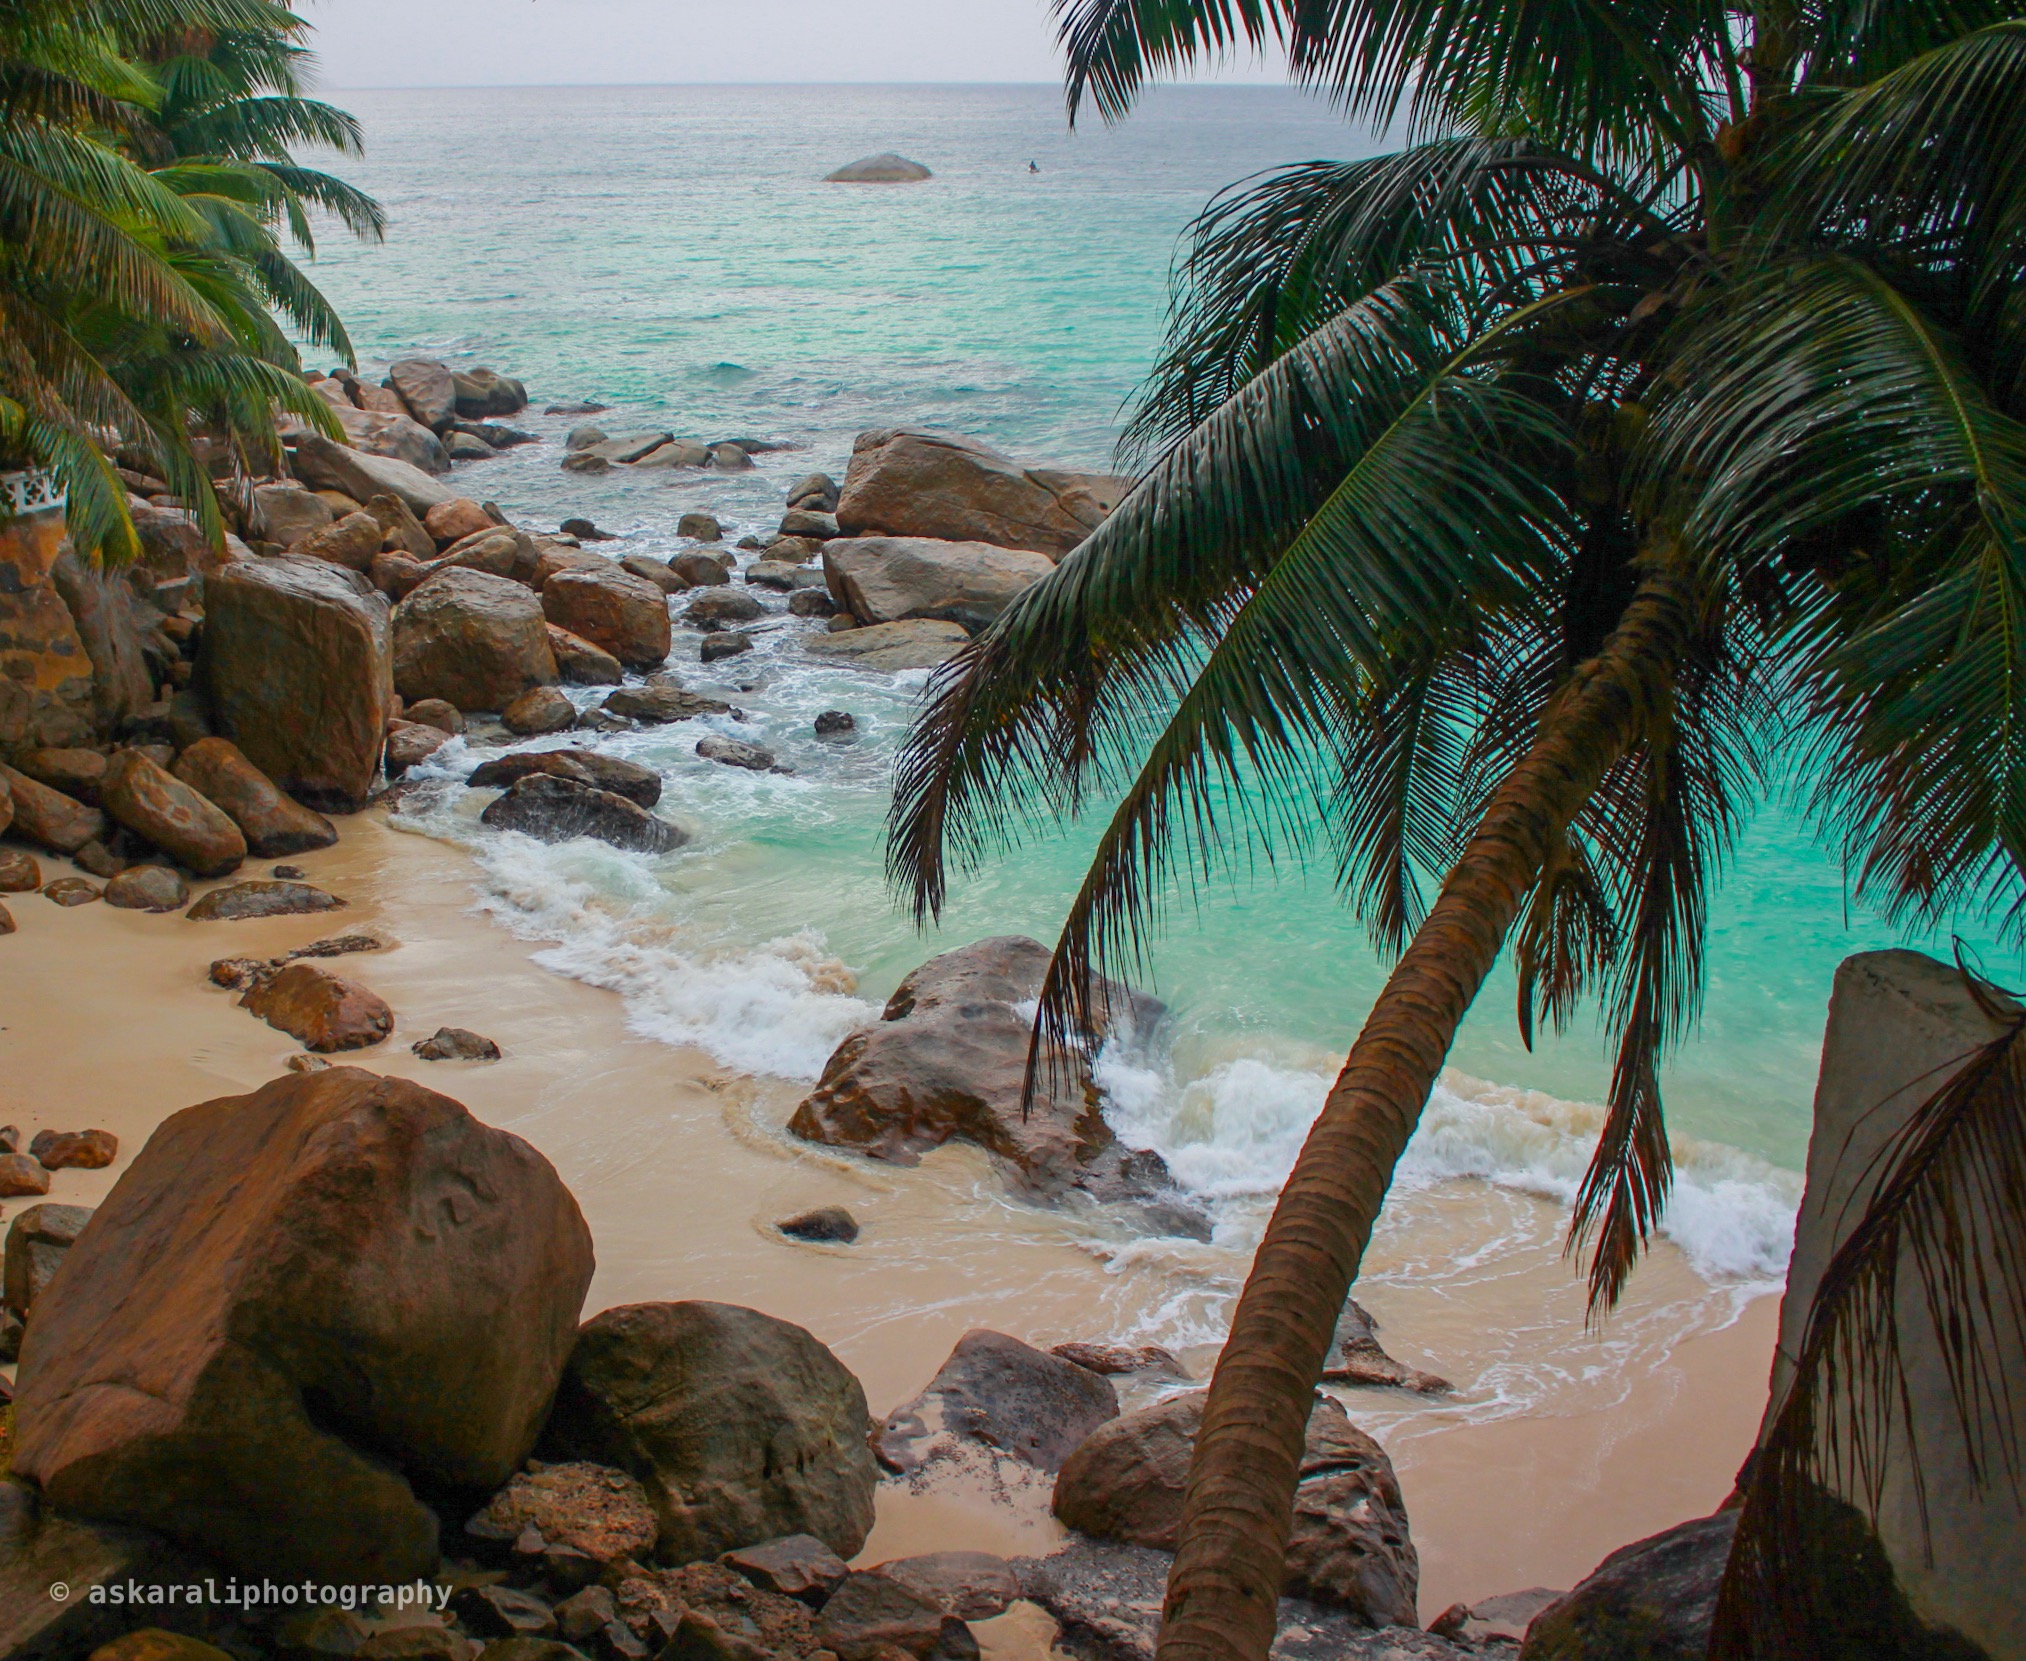 Beaches in seychelles are one of the best in the world. I found an amazing beach with no one for sunset view.
It is more like a private beach but Accessible for public if you find the way to beach from main road. I was glad I found this amazing beach in a random place.